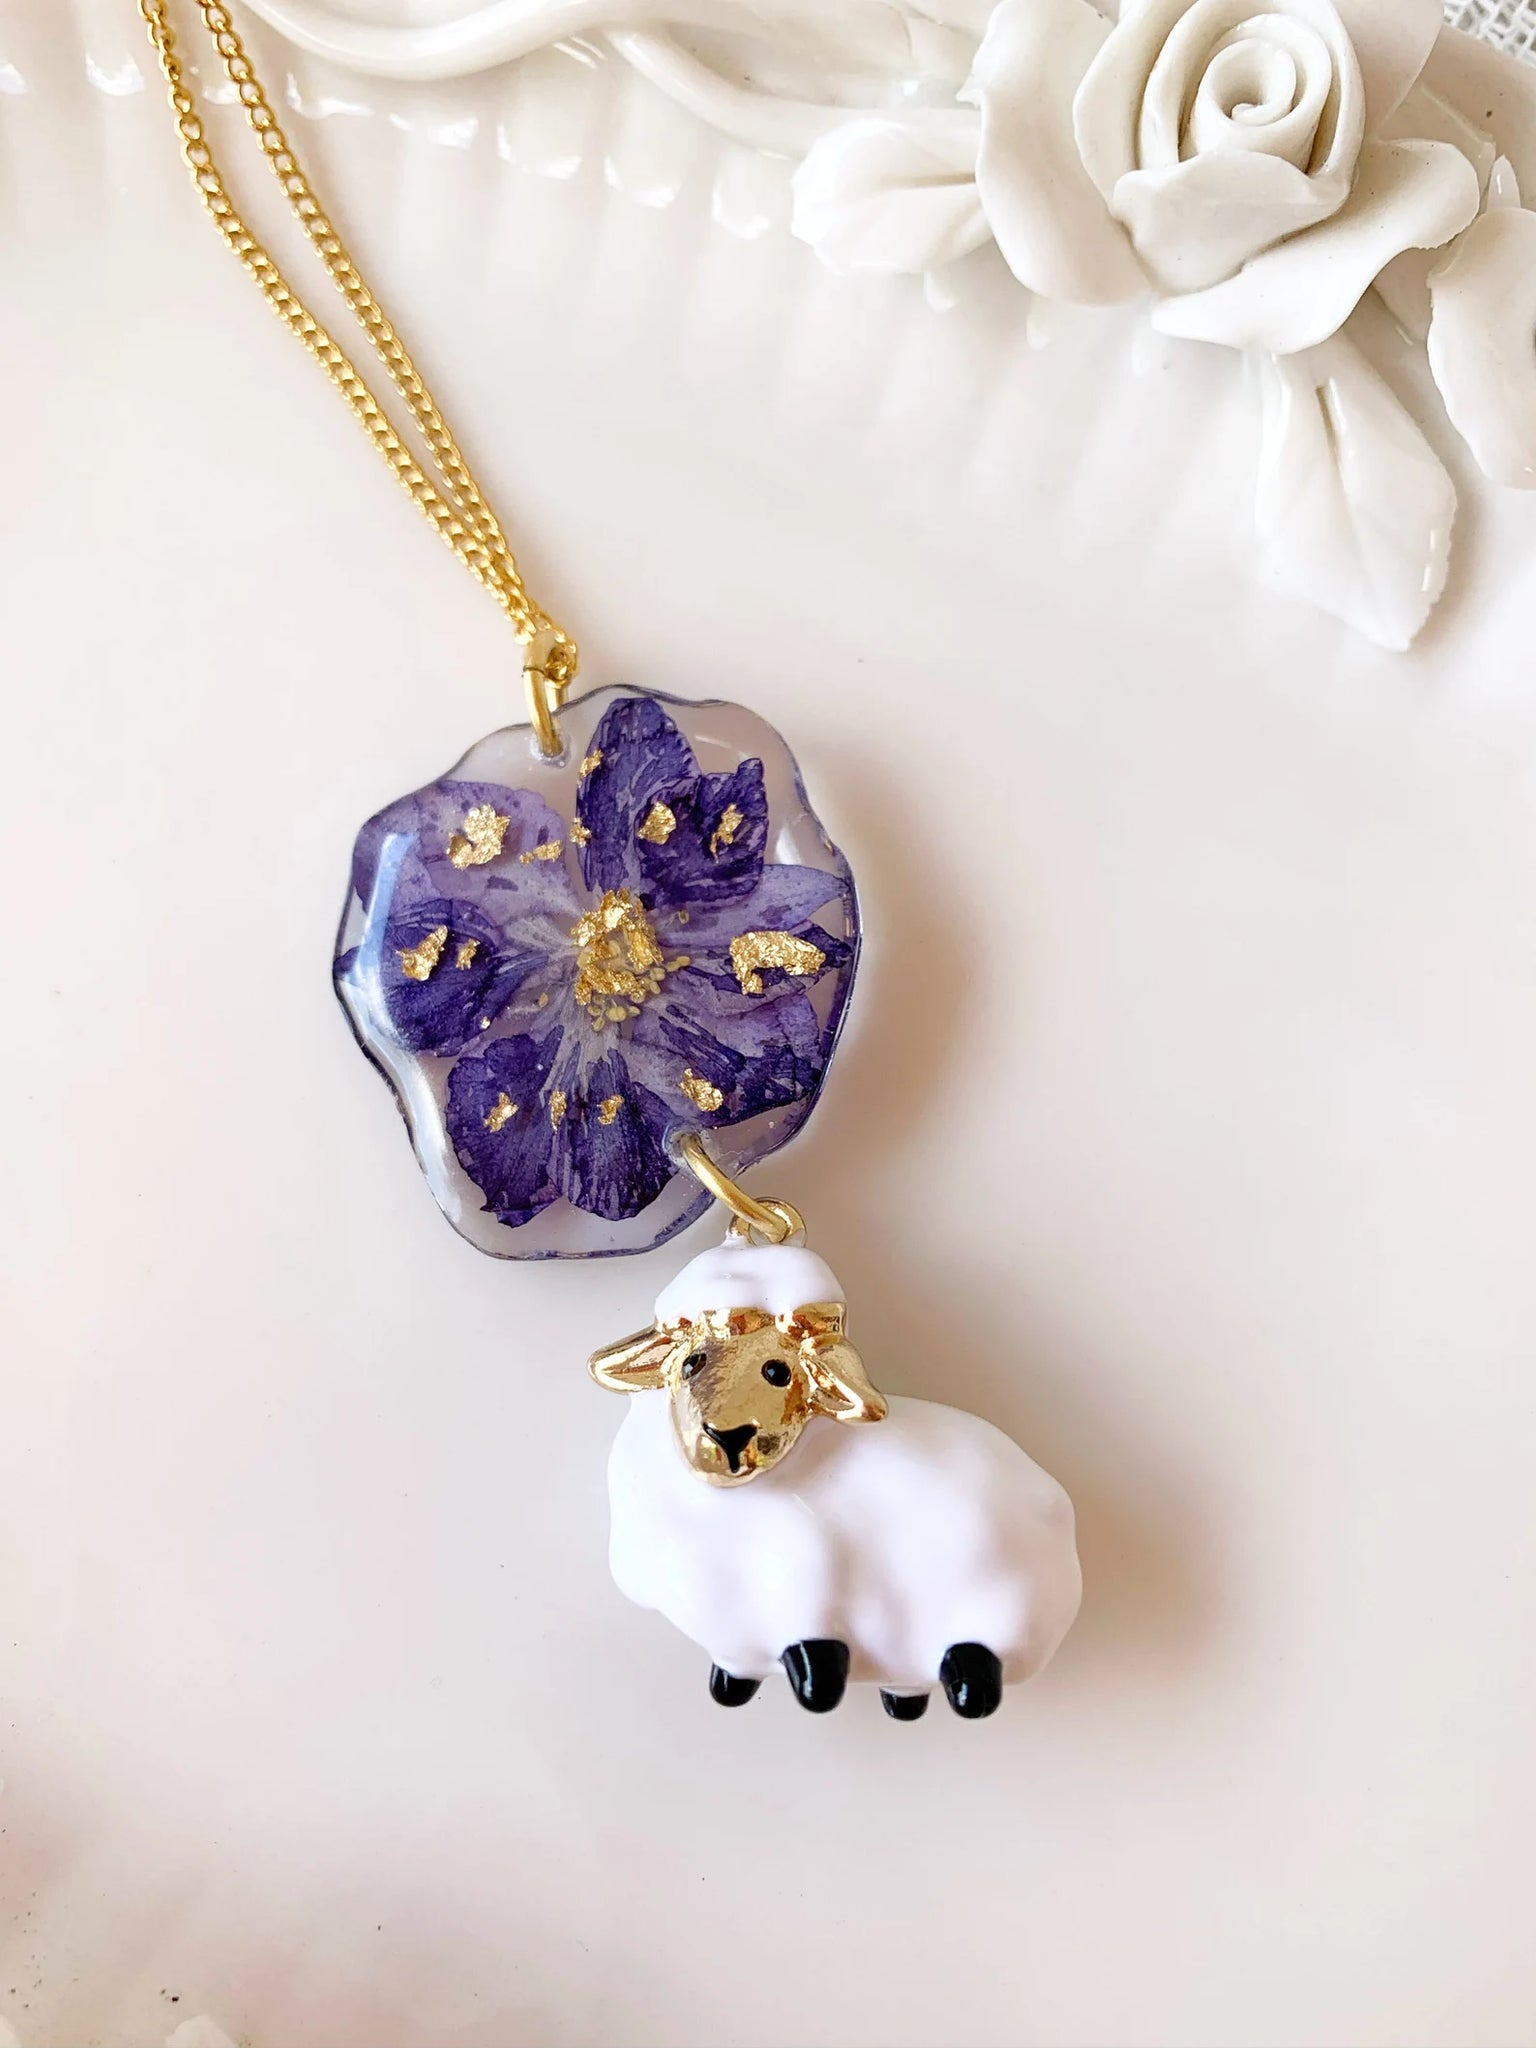 Sheep necklace, Sheep gift for women, Lamb necklace, Pressed flower necklace